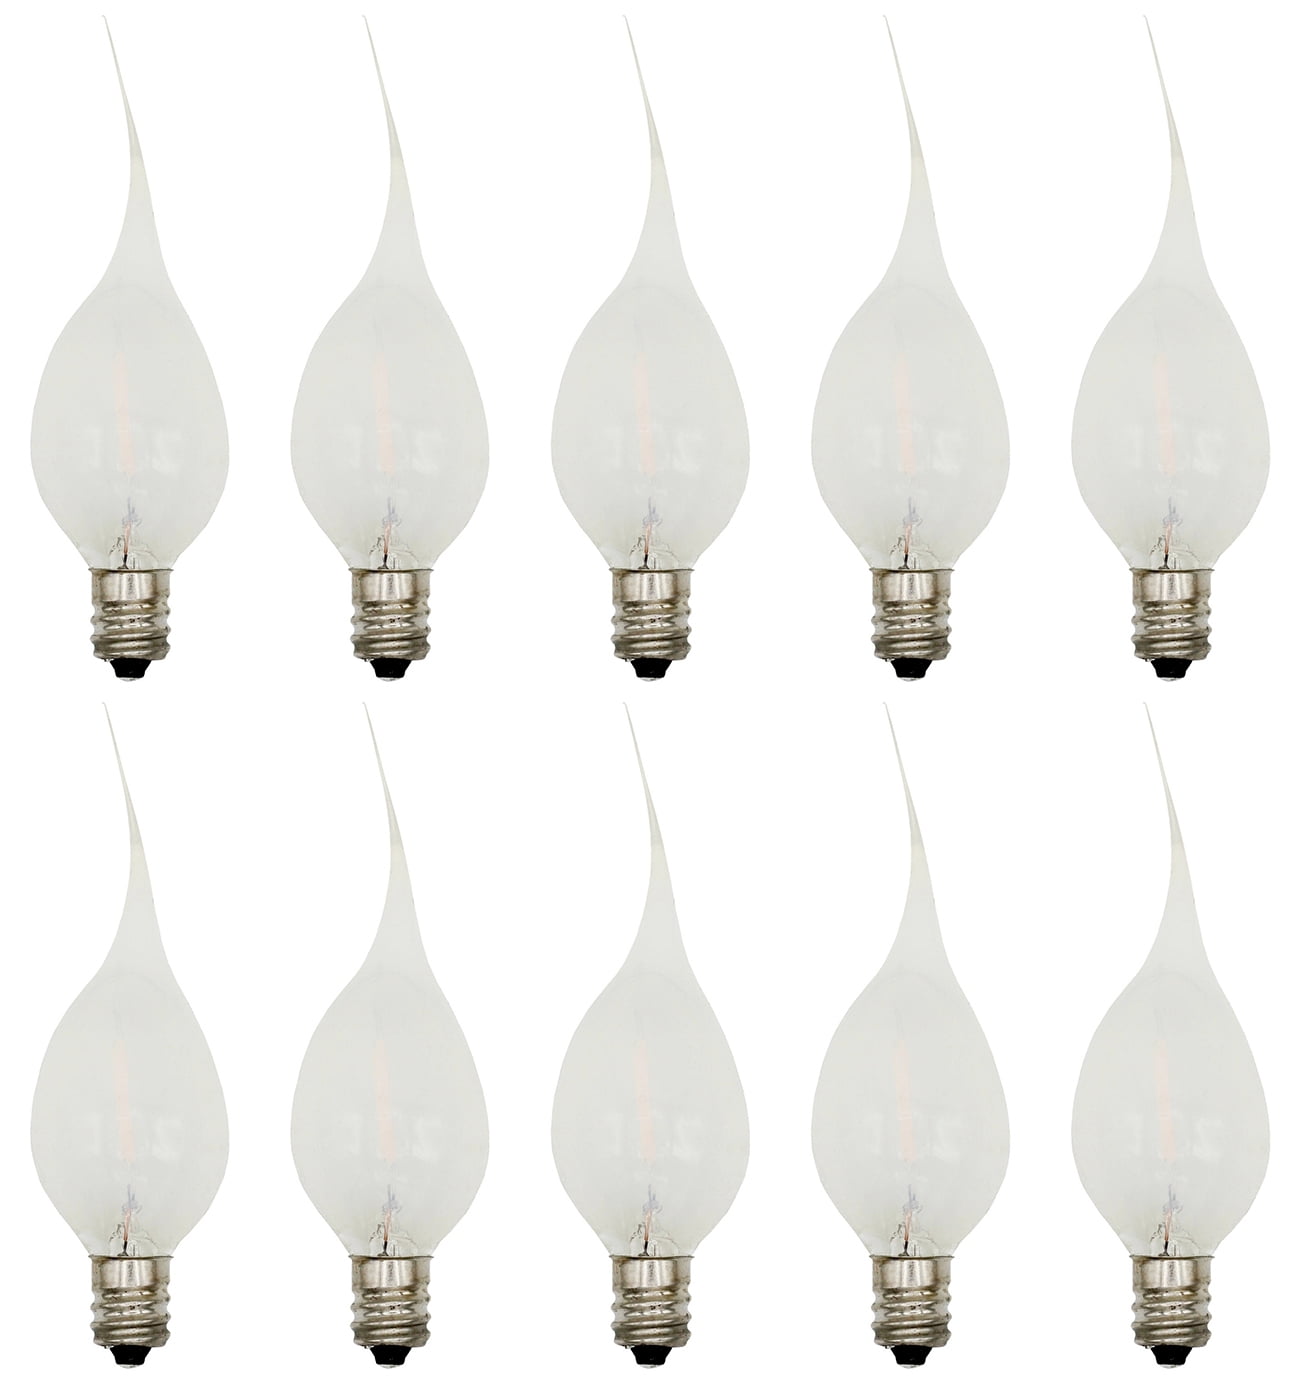 6 Watt Large Silicone Dipped Candle-Lite Light Bulbs Candelabra Socket 24 Pack 